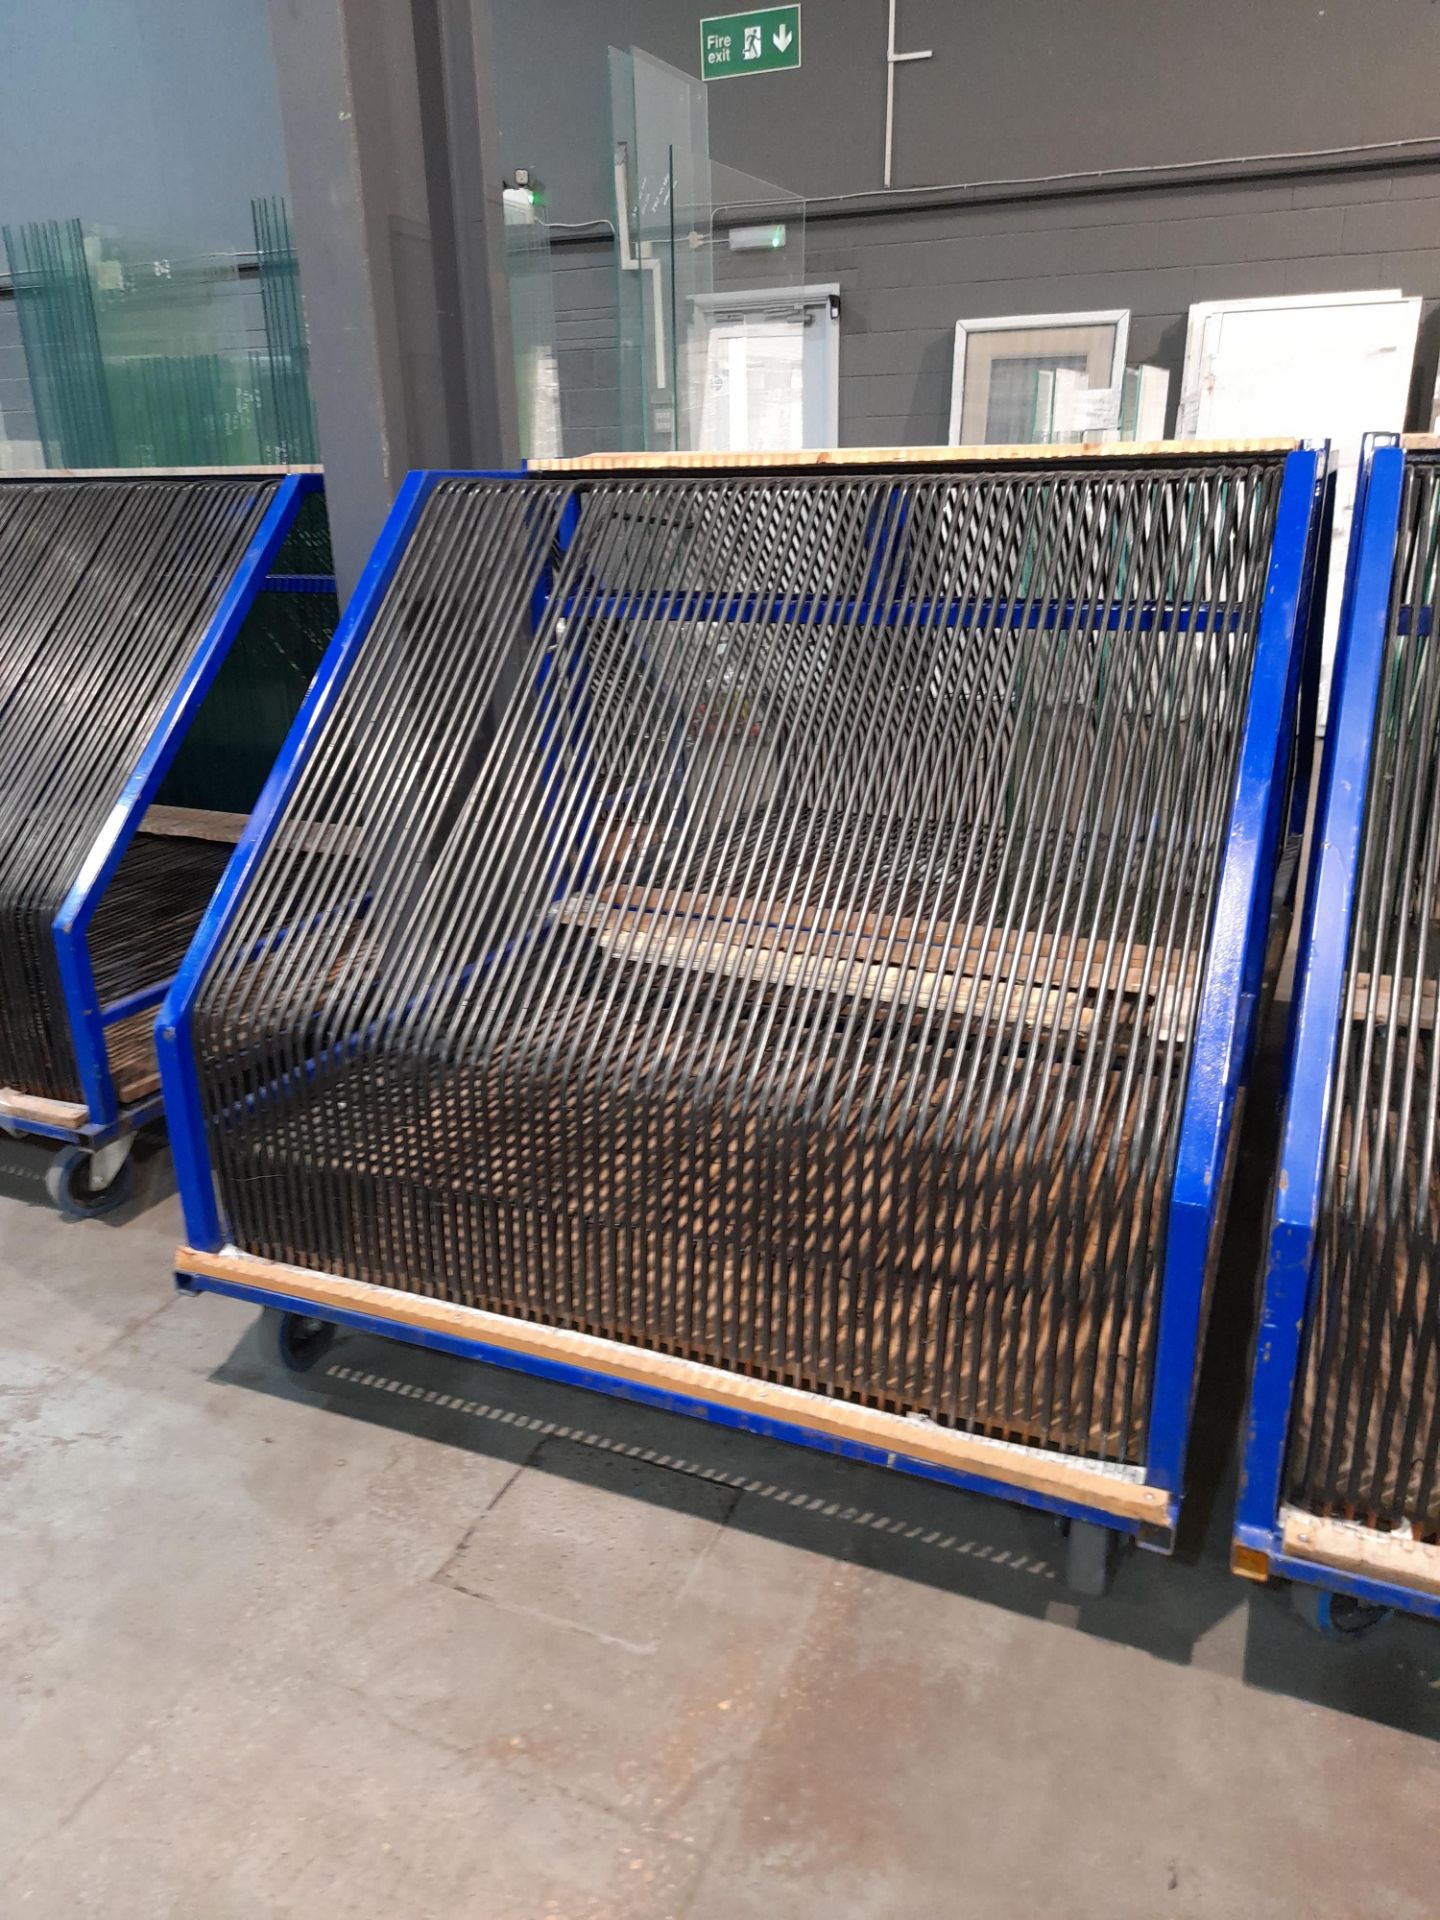 2 x Mobile glass sheet stock trolleys, with contents (Buyer must removal all) - Image 2 of 2